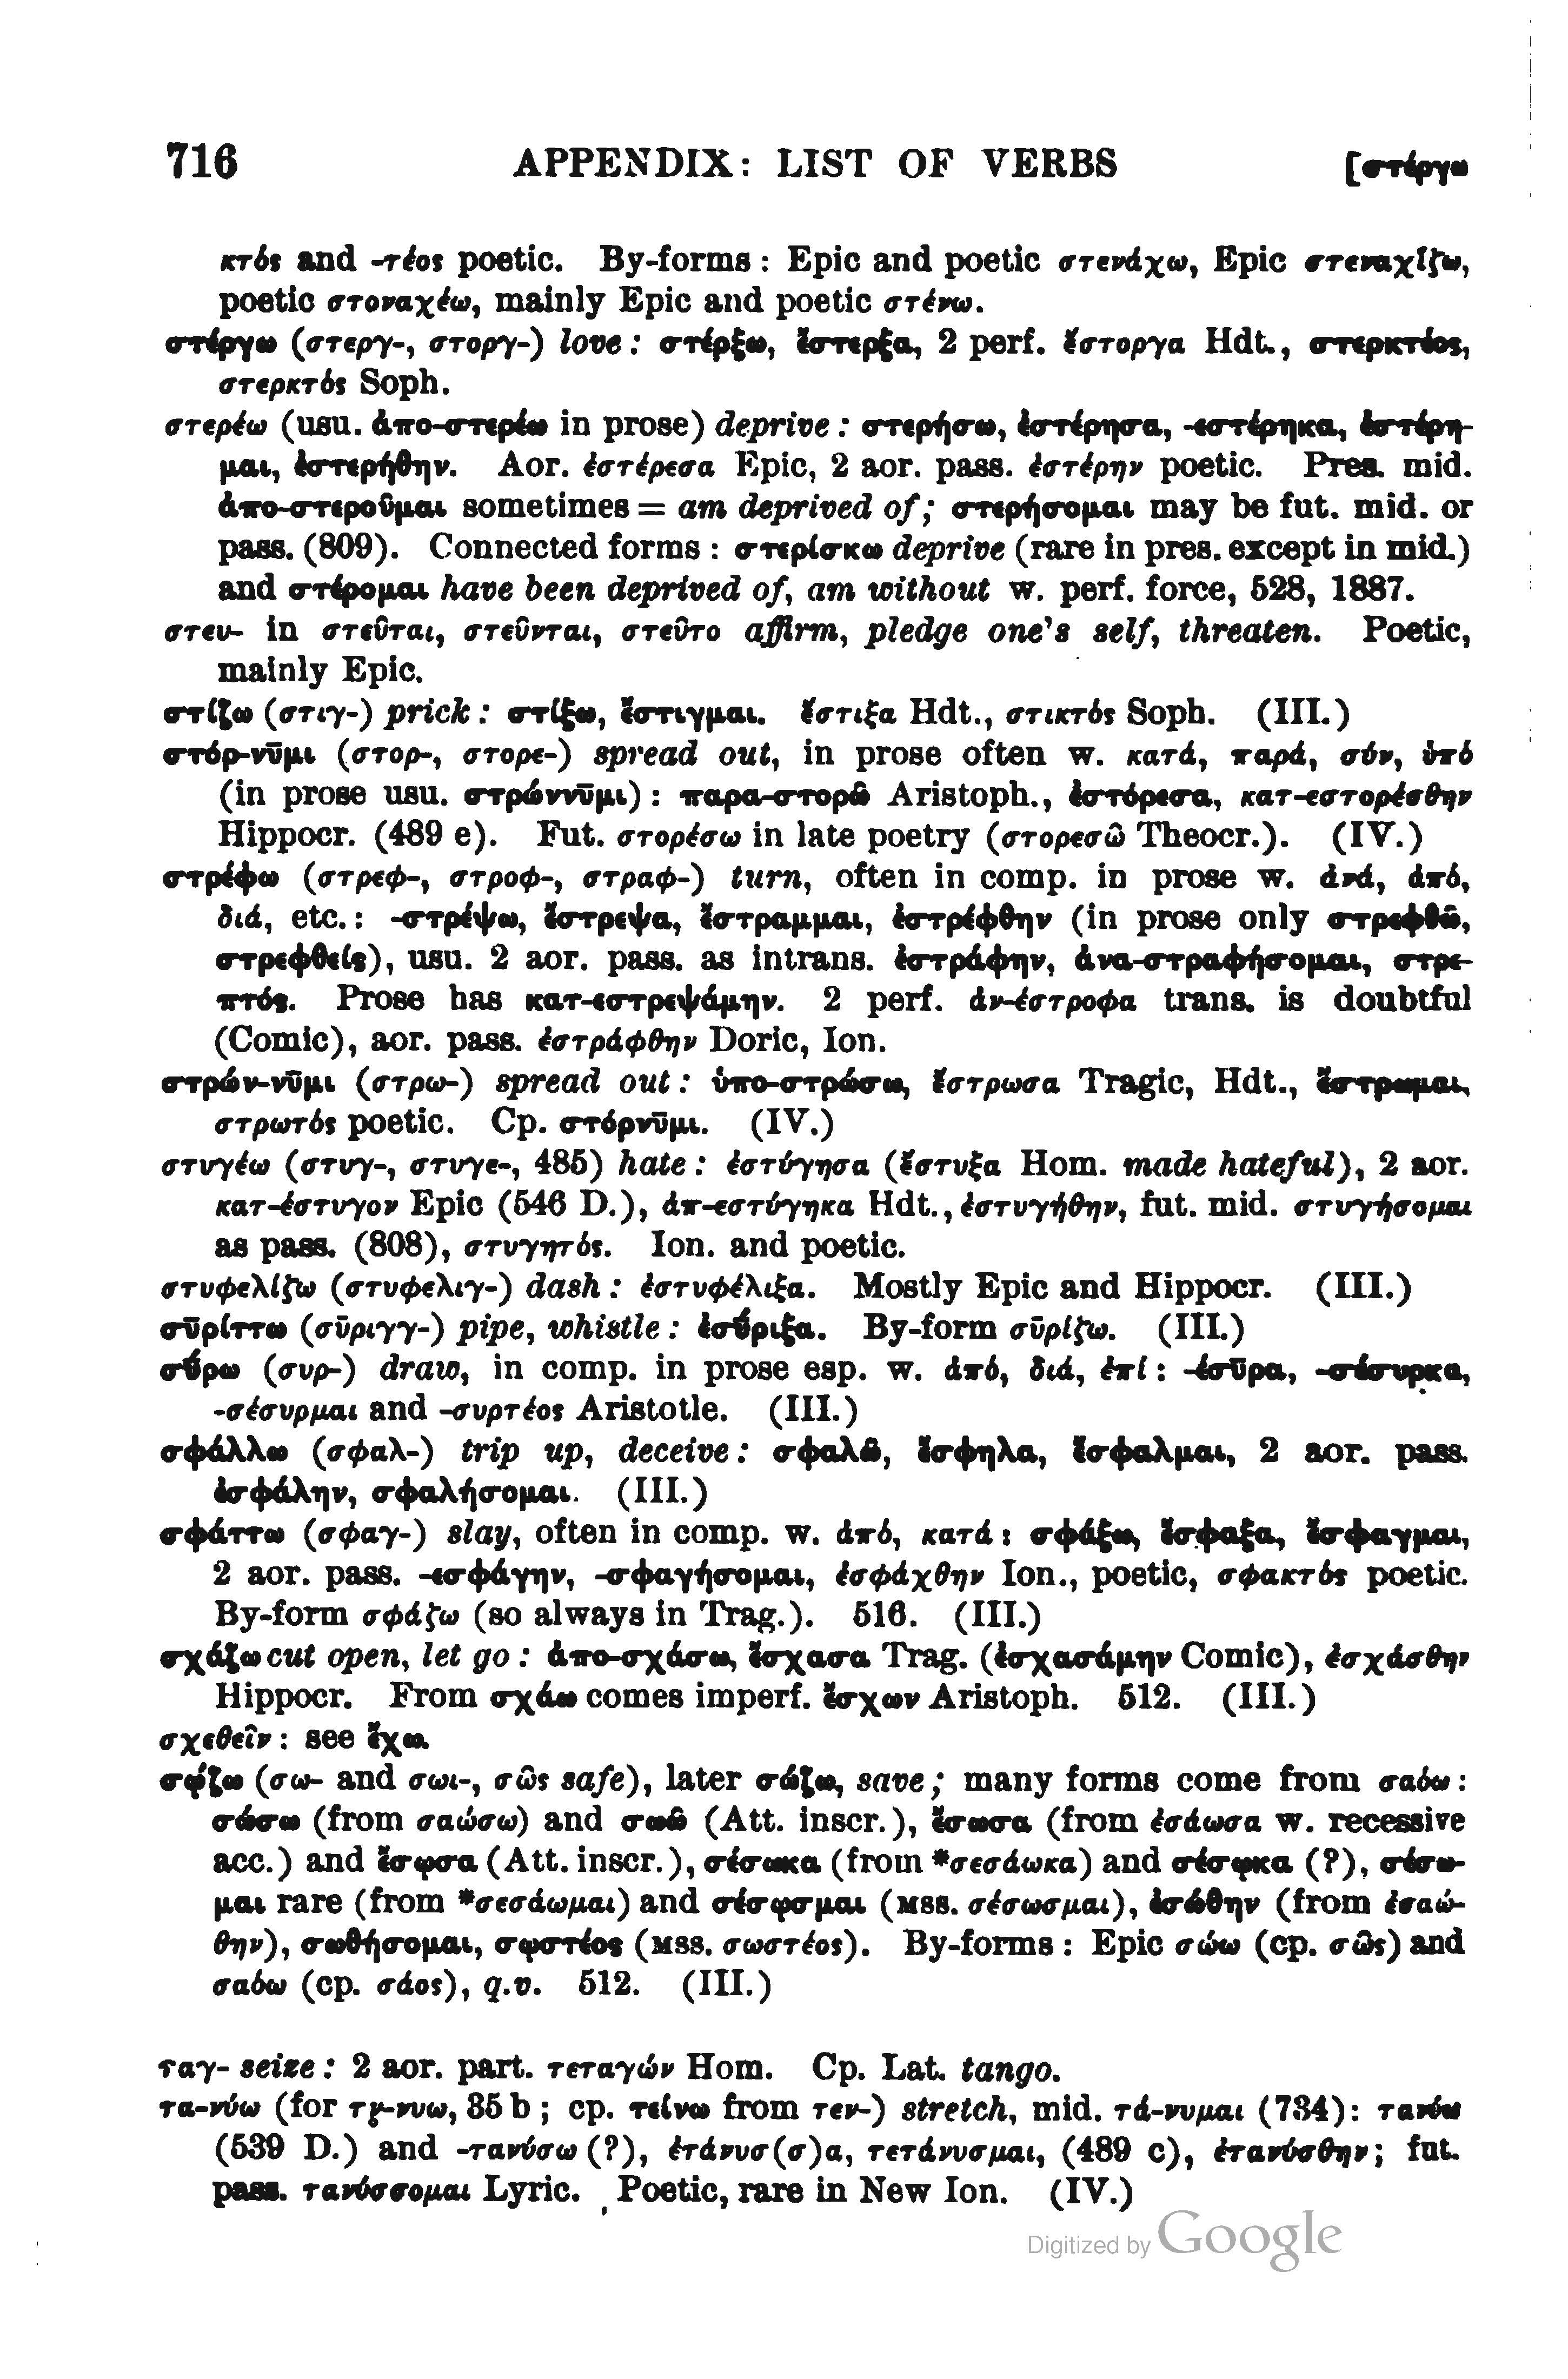 page from Smyth's catalogue of verbs